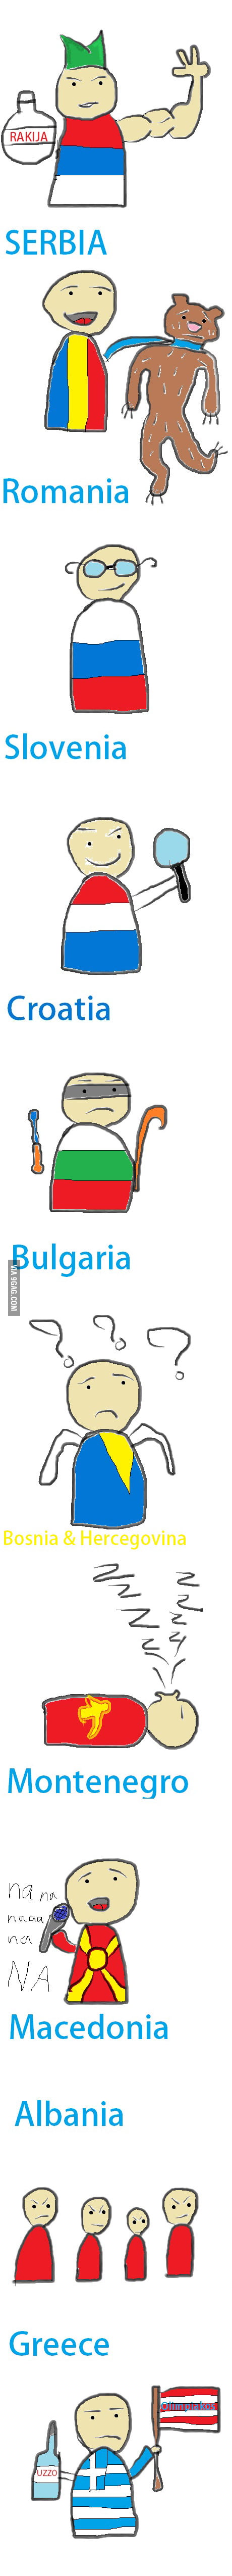 bulgarian stereotypes